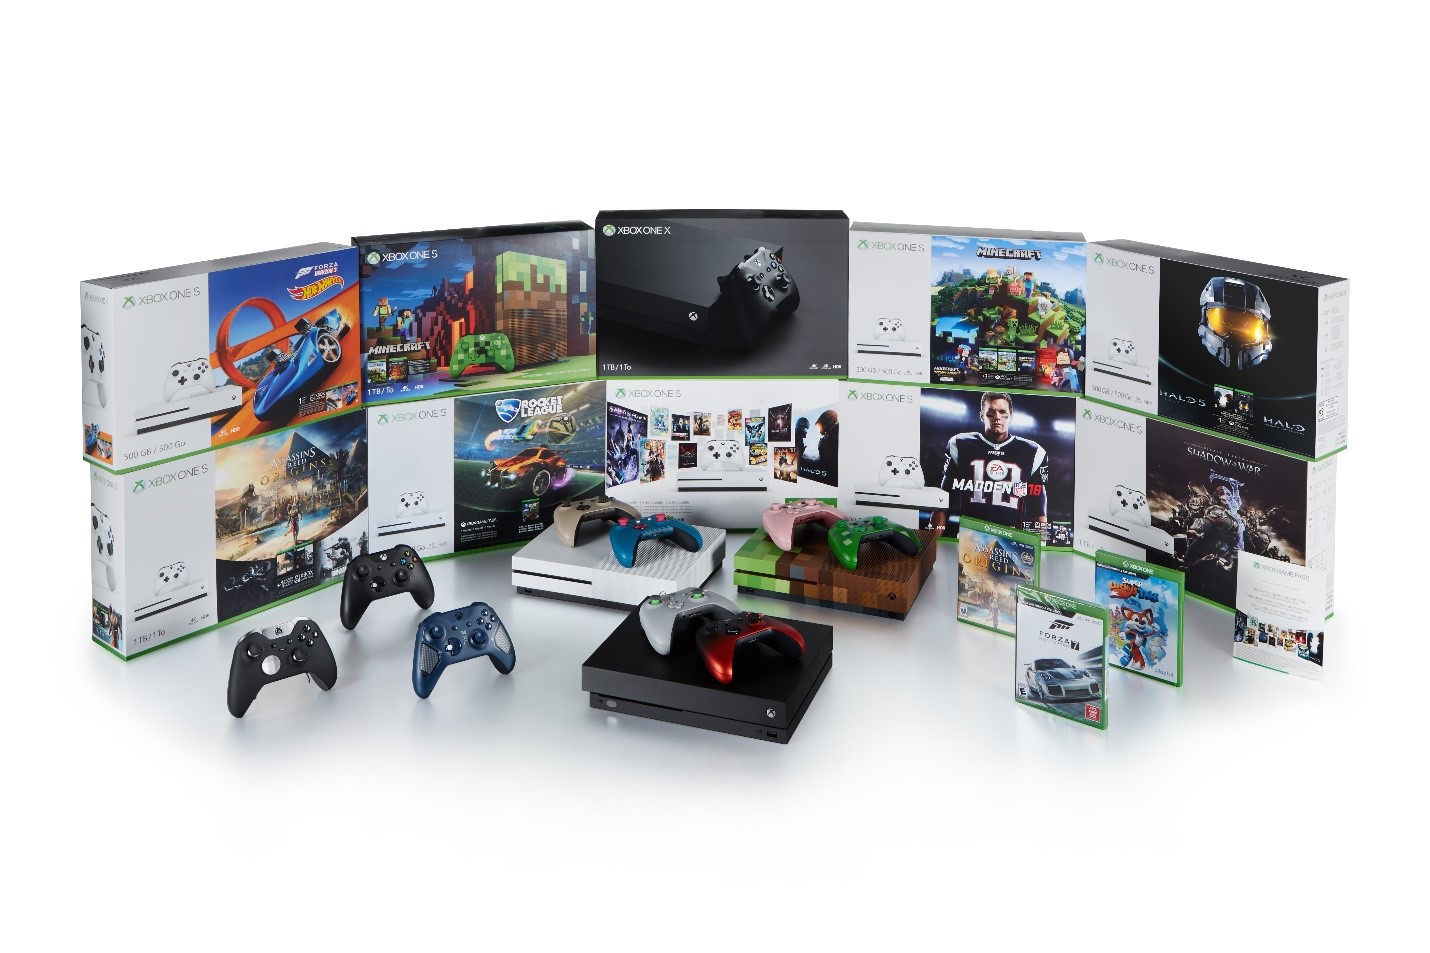 Xbox One S console bundles in a group shot.